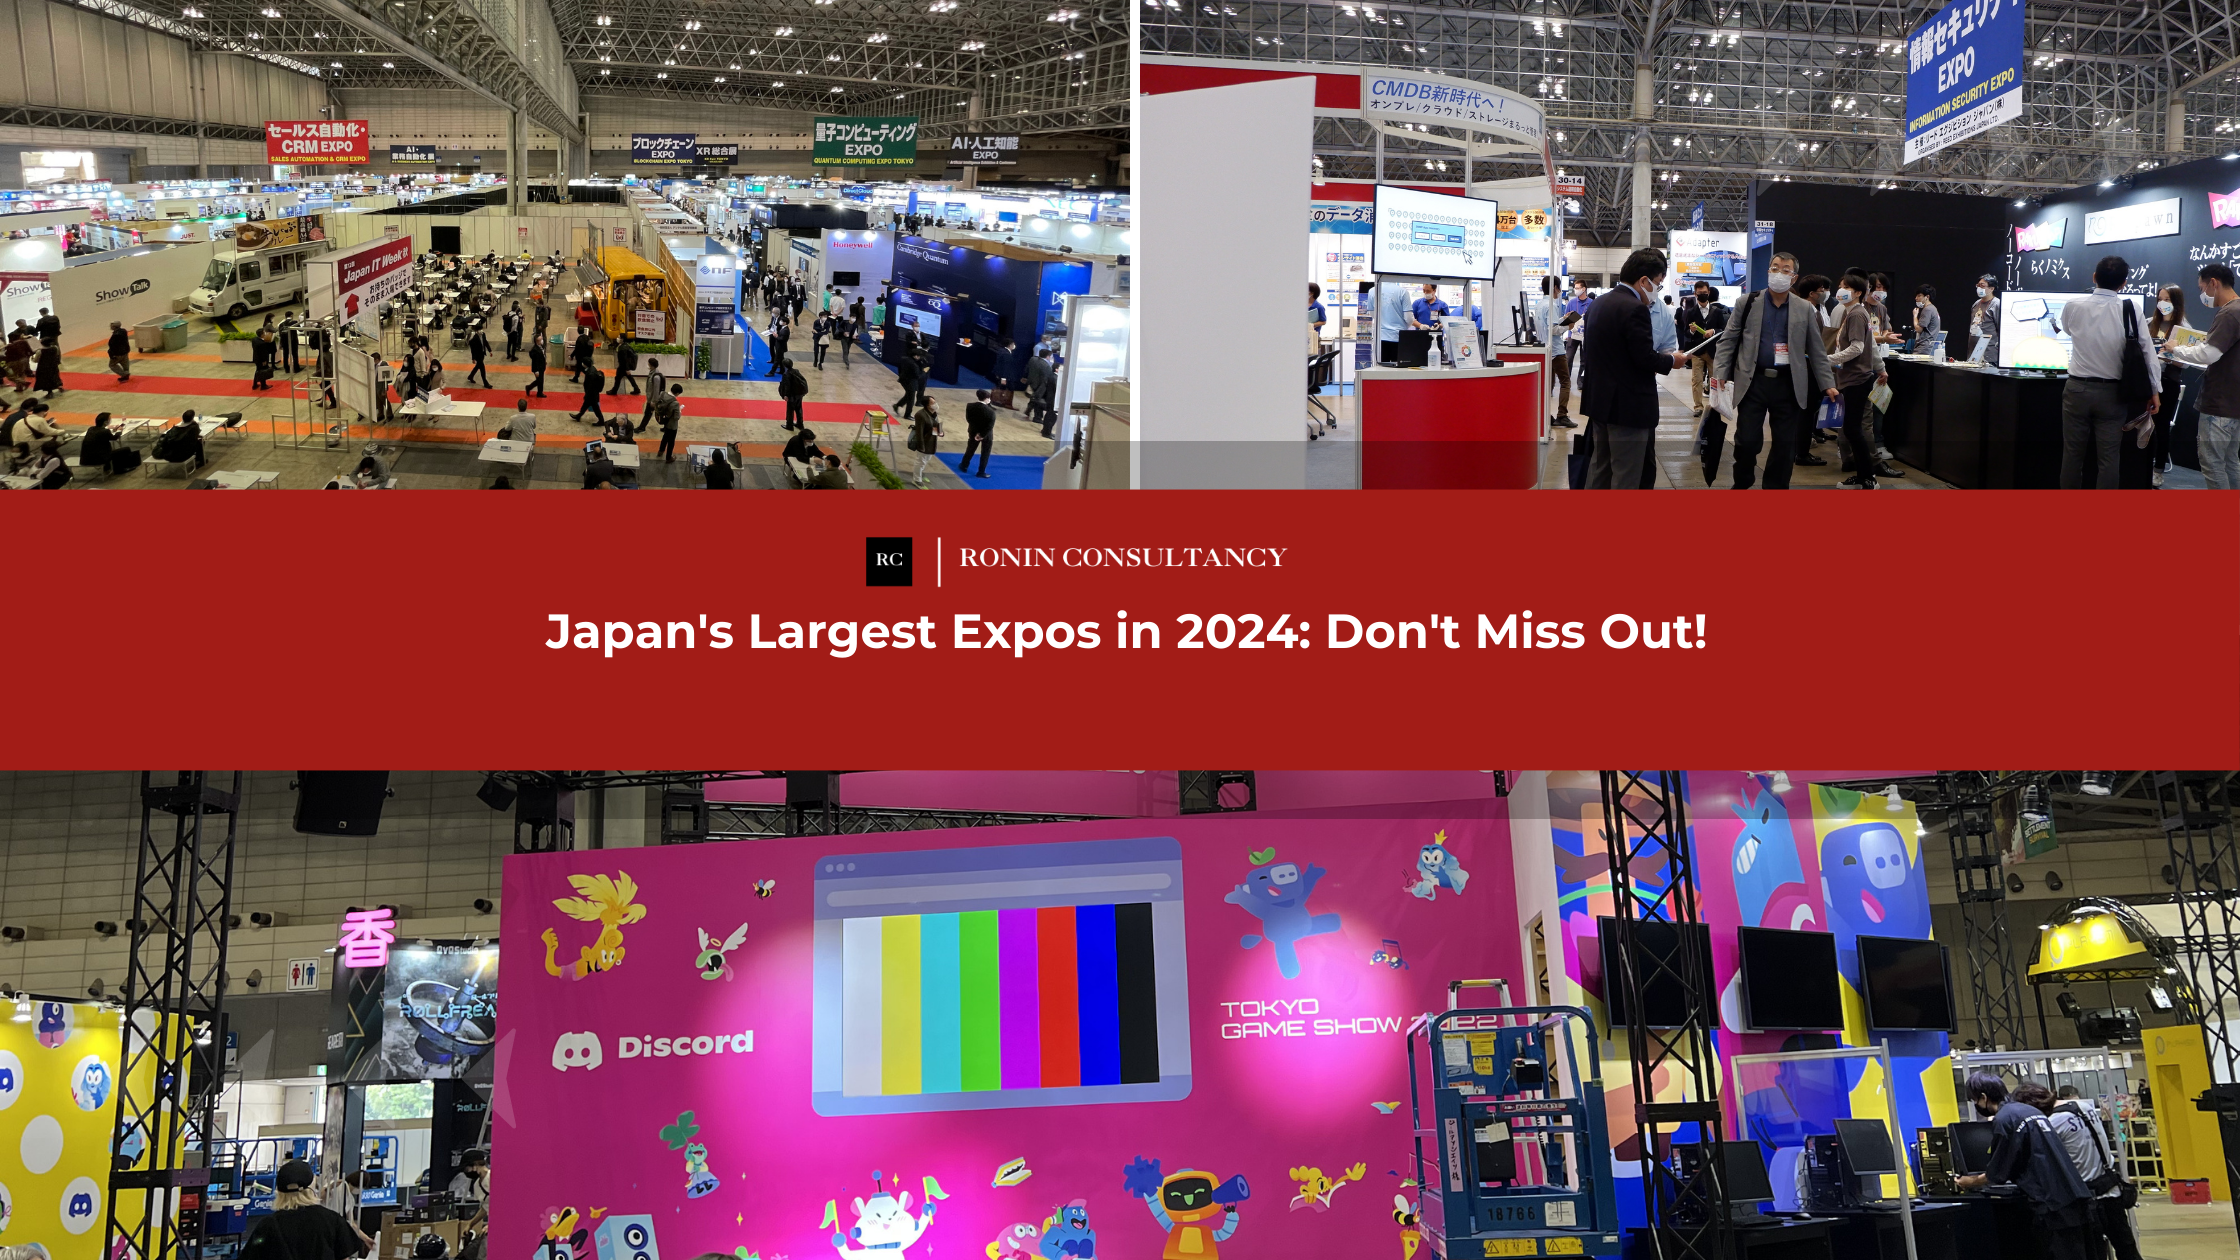 Japan's Largest Expos